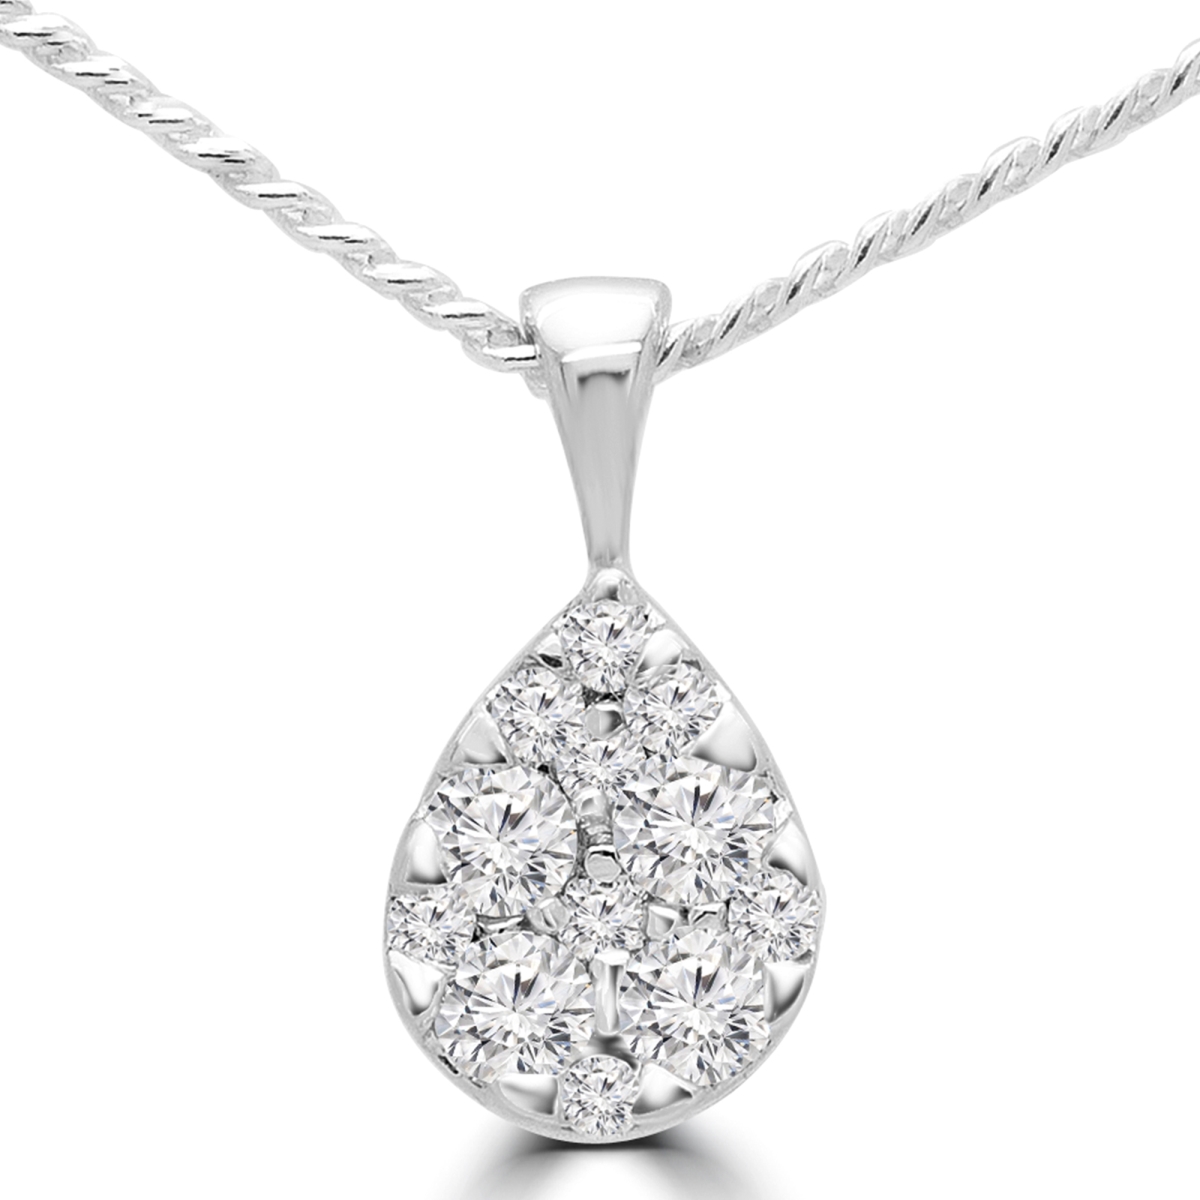 Mdr190017 0.12 Ctw Round Diamond Pear Cluster Pendant Necklace In 14k White Gold With Chain